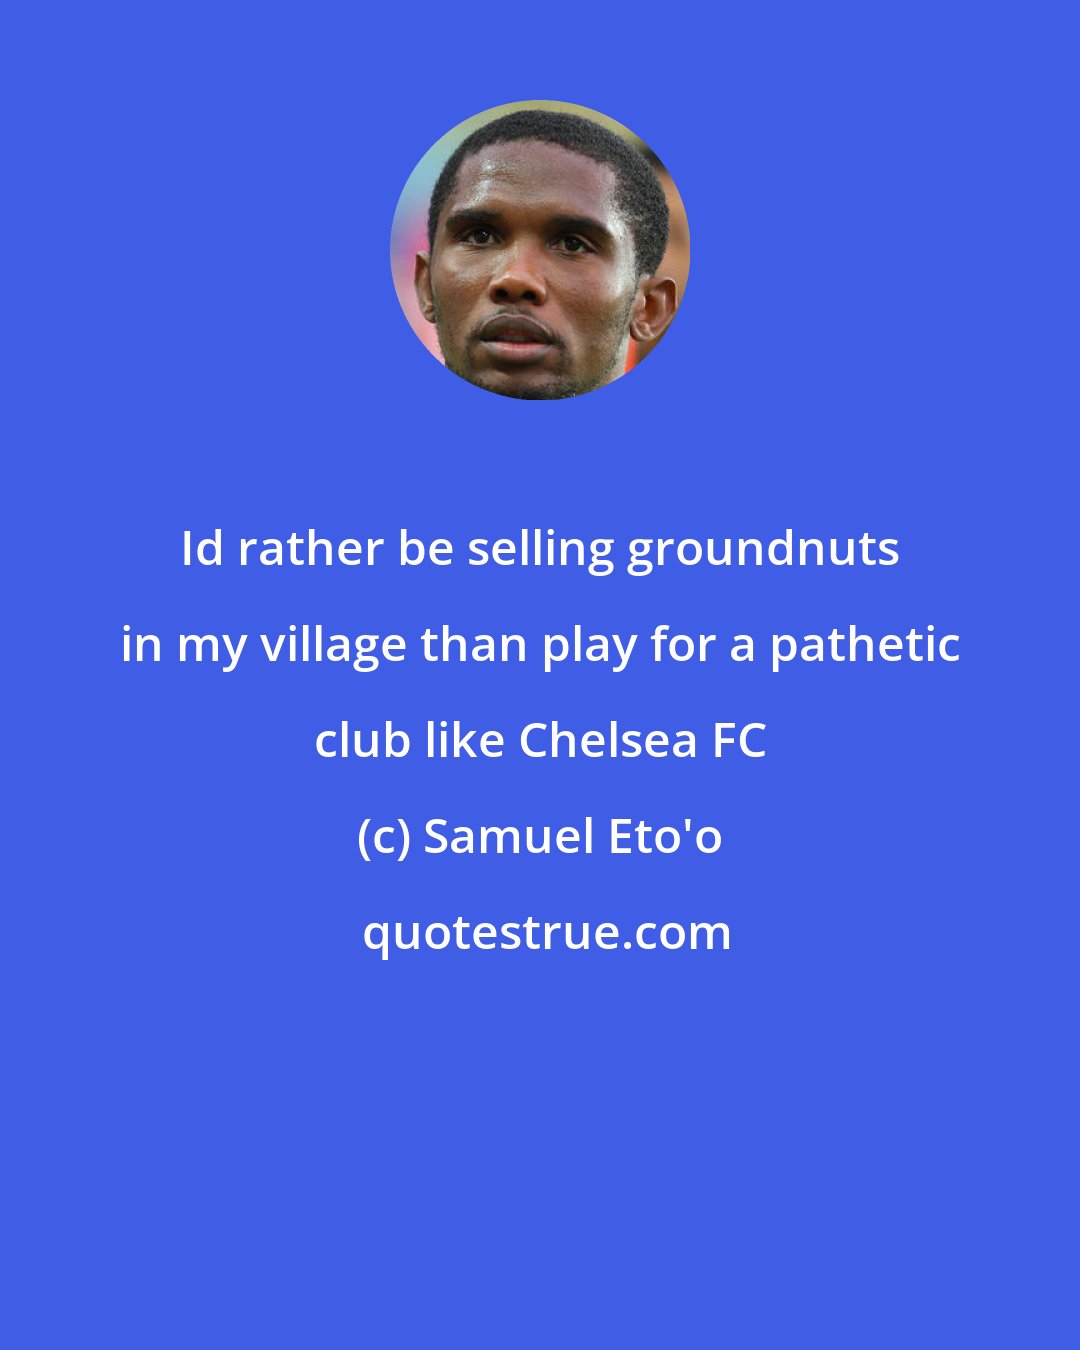 Samuel Eto'o: Id rather be selling groundnuts in my village than play for a pathetic club like Chelsea FC